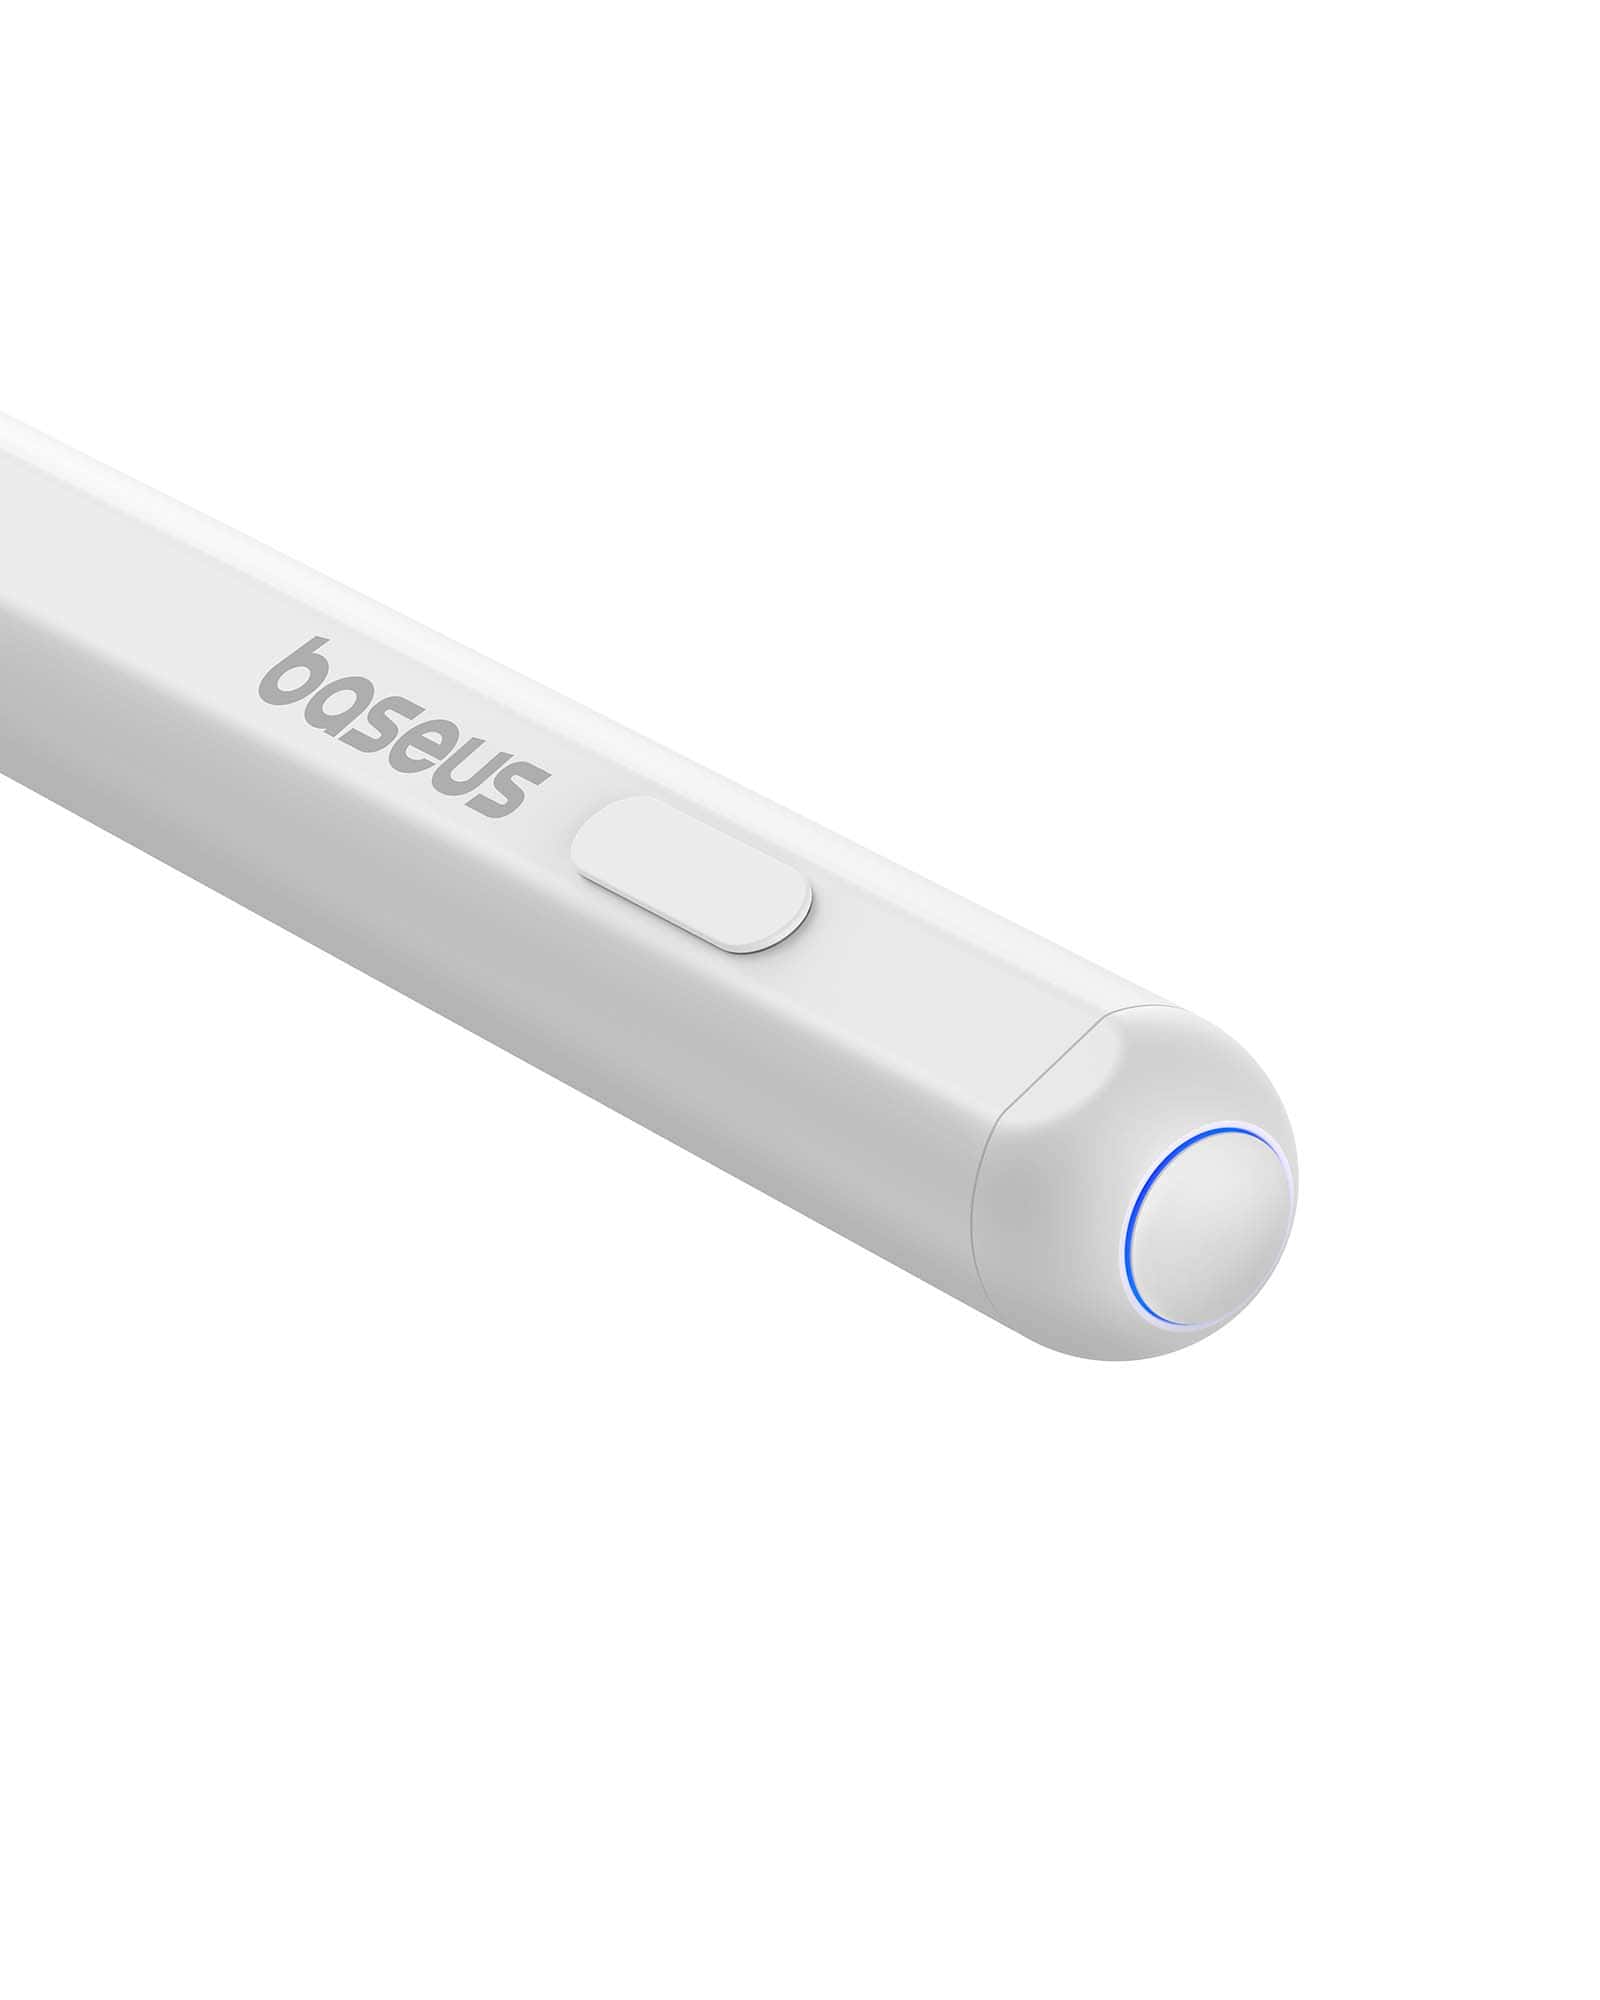 Baseus Smooth Writing 2 Series Dual Charging Stylus Active Version Wireless/Cabled Charging, Moon White(Active Version wireless/cabled charging with type-C cable and active pen tip)